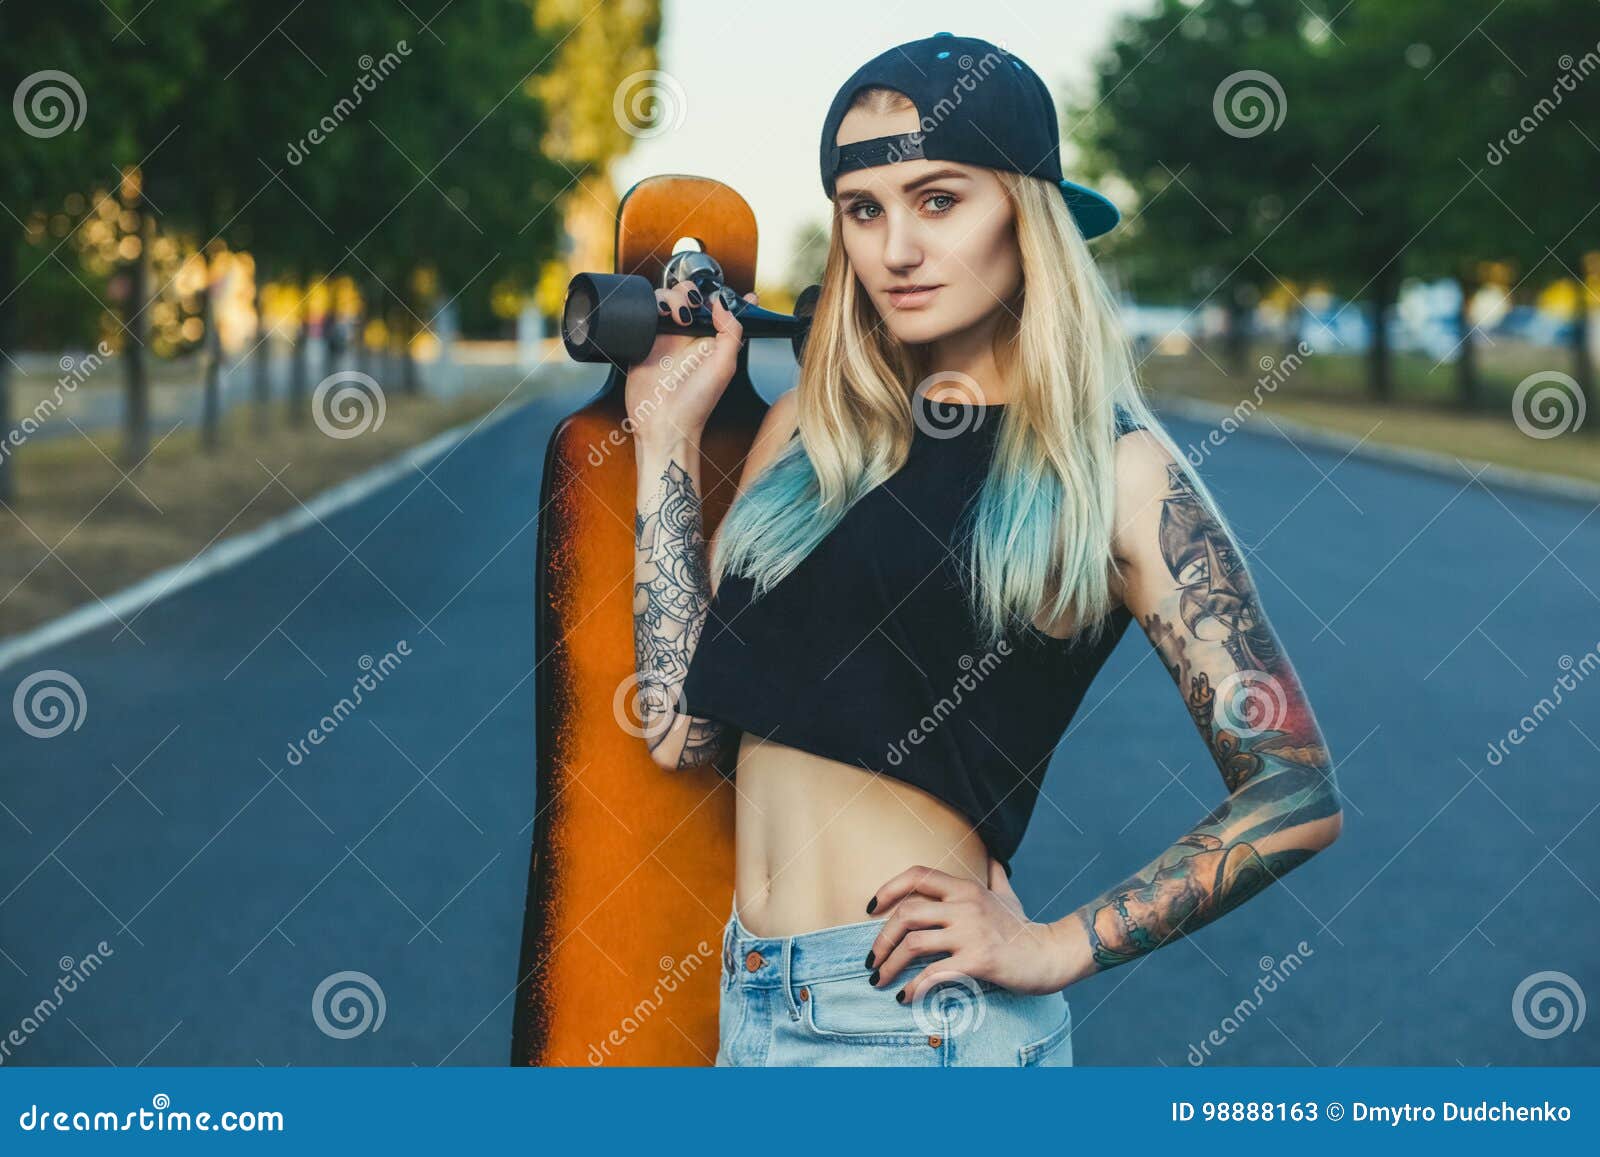 Blue hair tattoo HD - Getty Images - wide 8